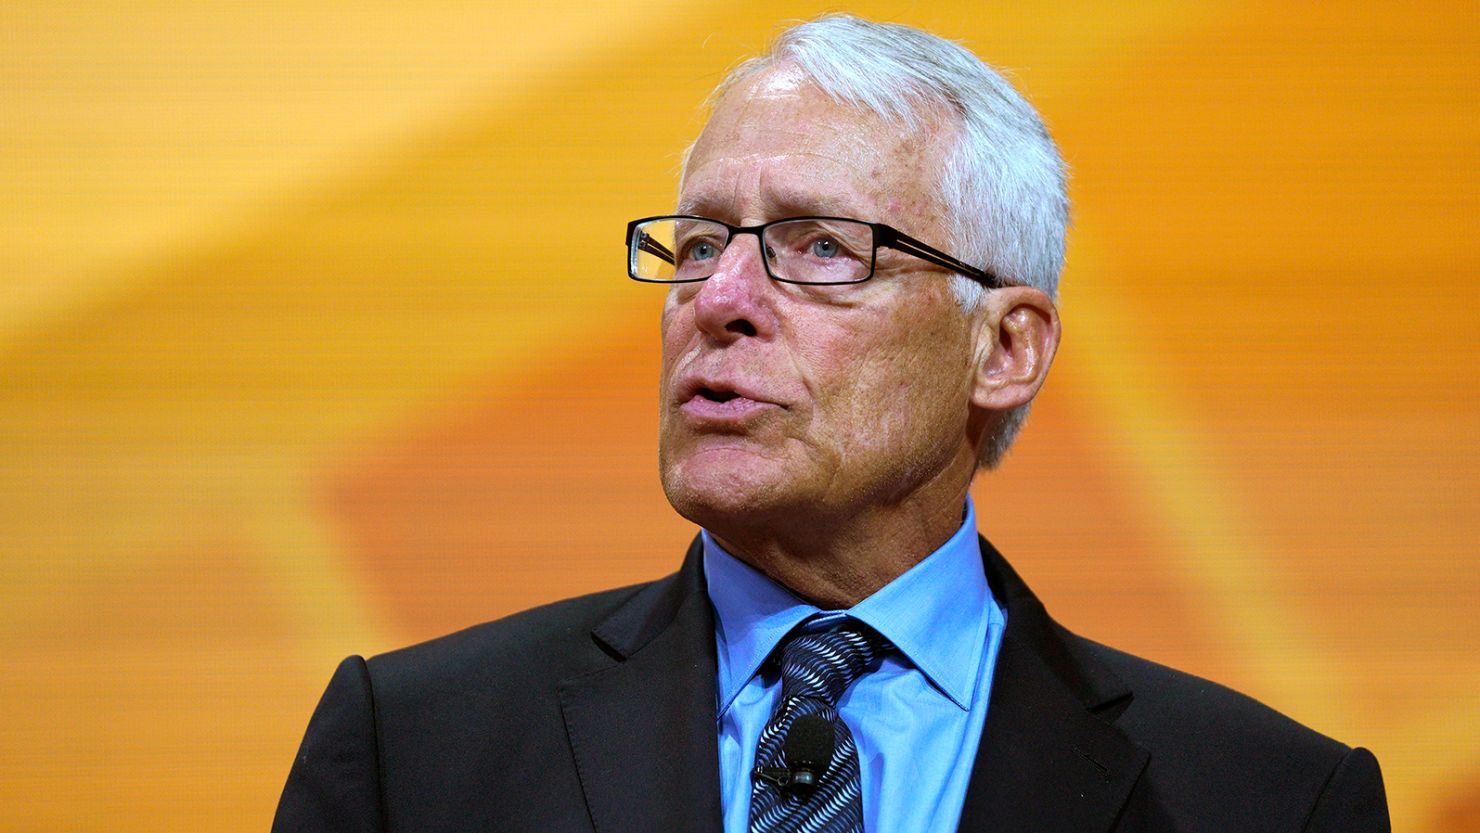 Rob Walton heads a group hoping to purchase the Denver Broncos. 